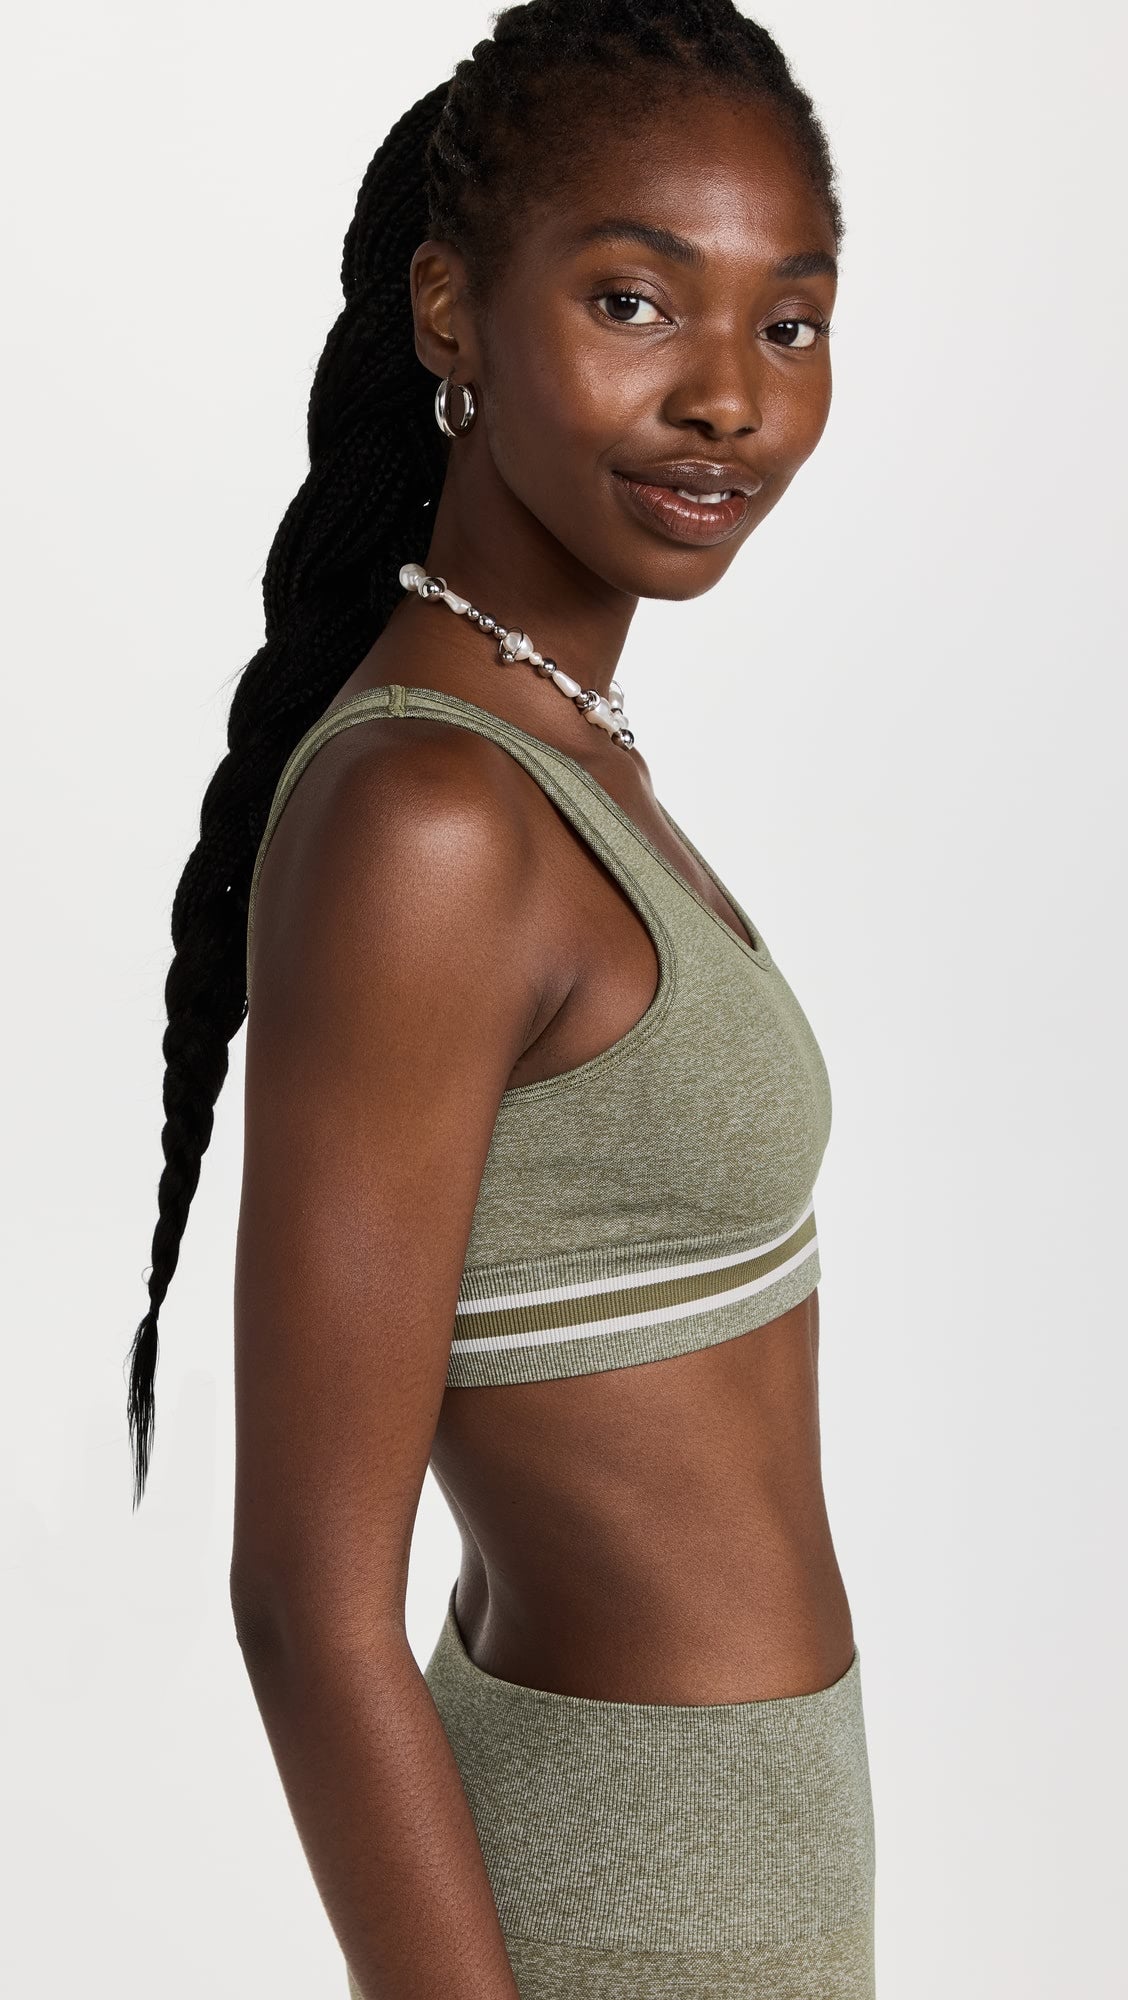 The Upside Marle Seamless Daisy Bra in Olive